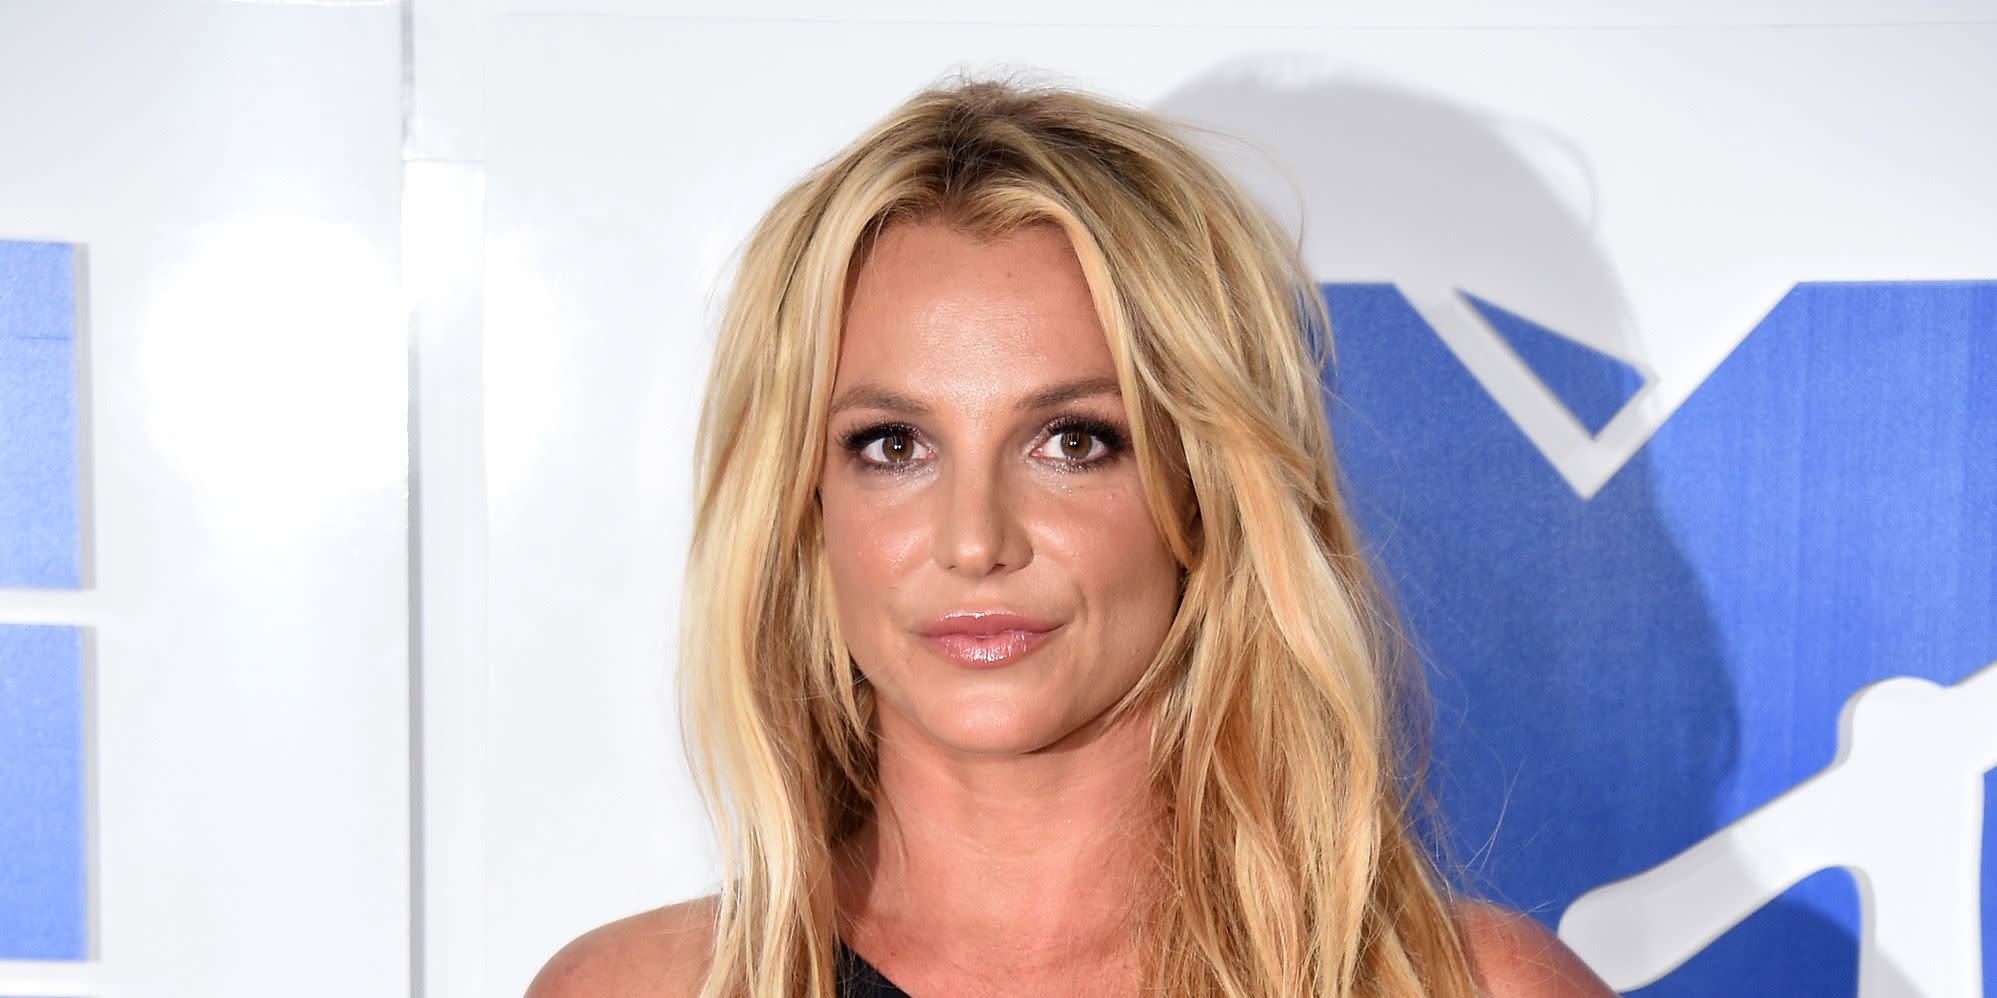 How To Watch The Framing Britney Spears Documentary